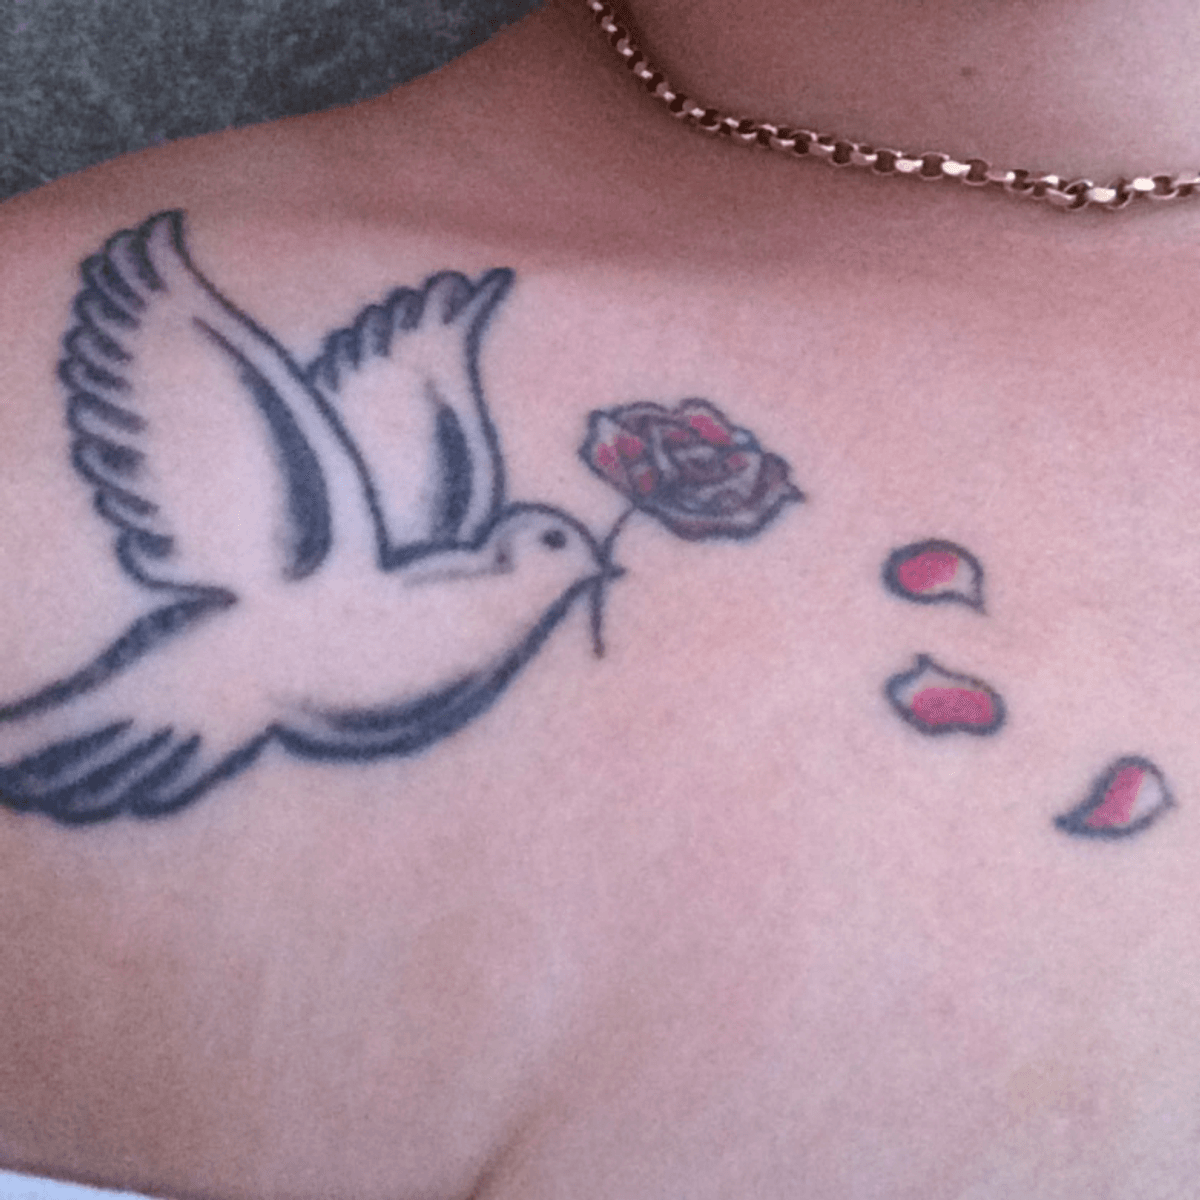 Tattoo uploaded by Shannon Zoe • This tattoo has meaning and is for my son.  The dove to represent peace and the red rose to represent my love for him.  ❤️ • Tattoodo